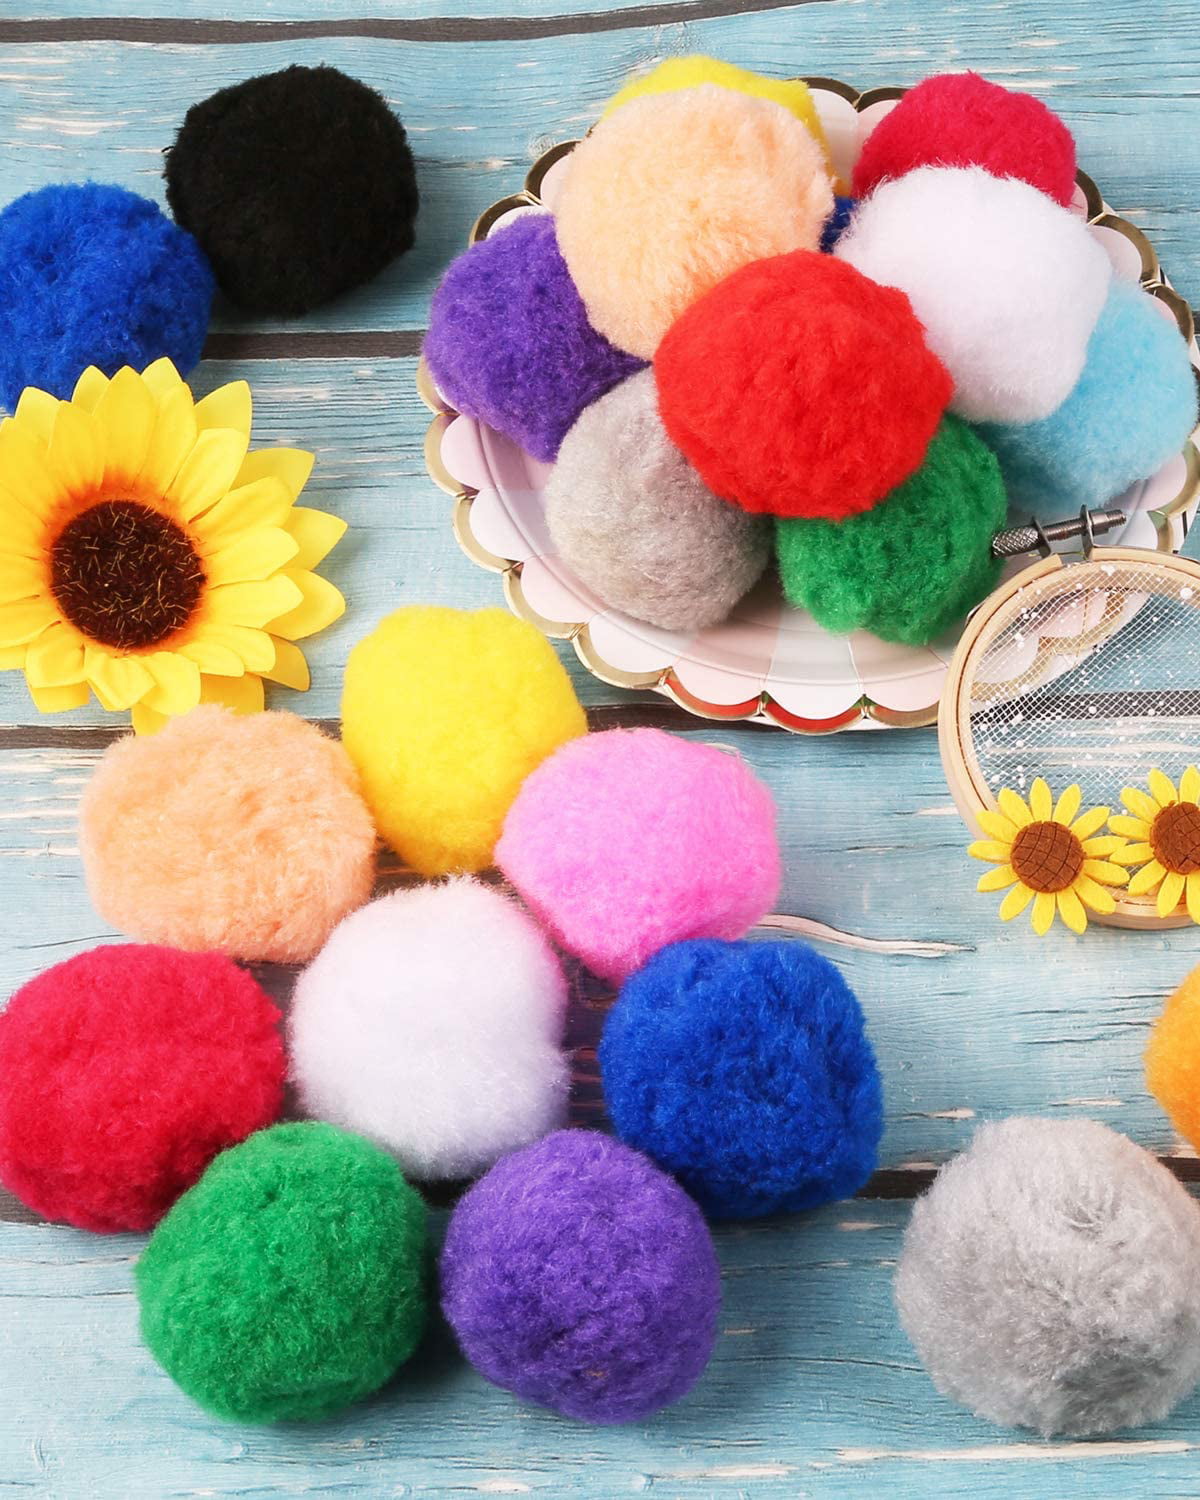 Pllieay 30 Pcs 2.4 Inch Very Large Assorted Pom Poms for Arts and  Crafts,Multicolor Pompoms for DIY Creative Crafts Decorations,Perfect for  Kids